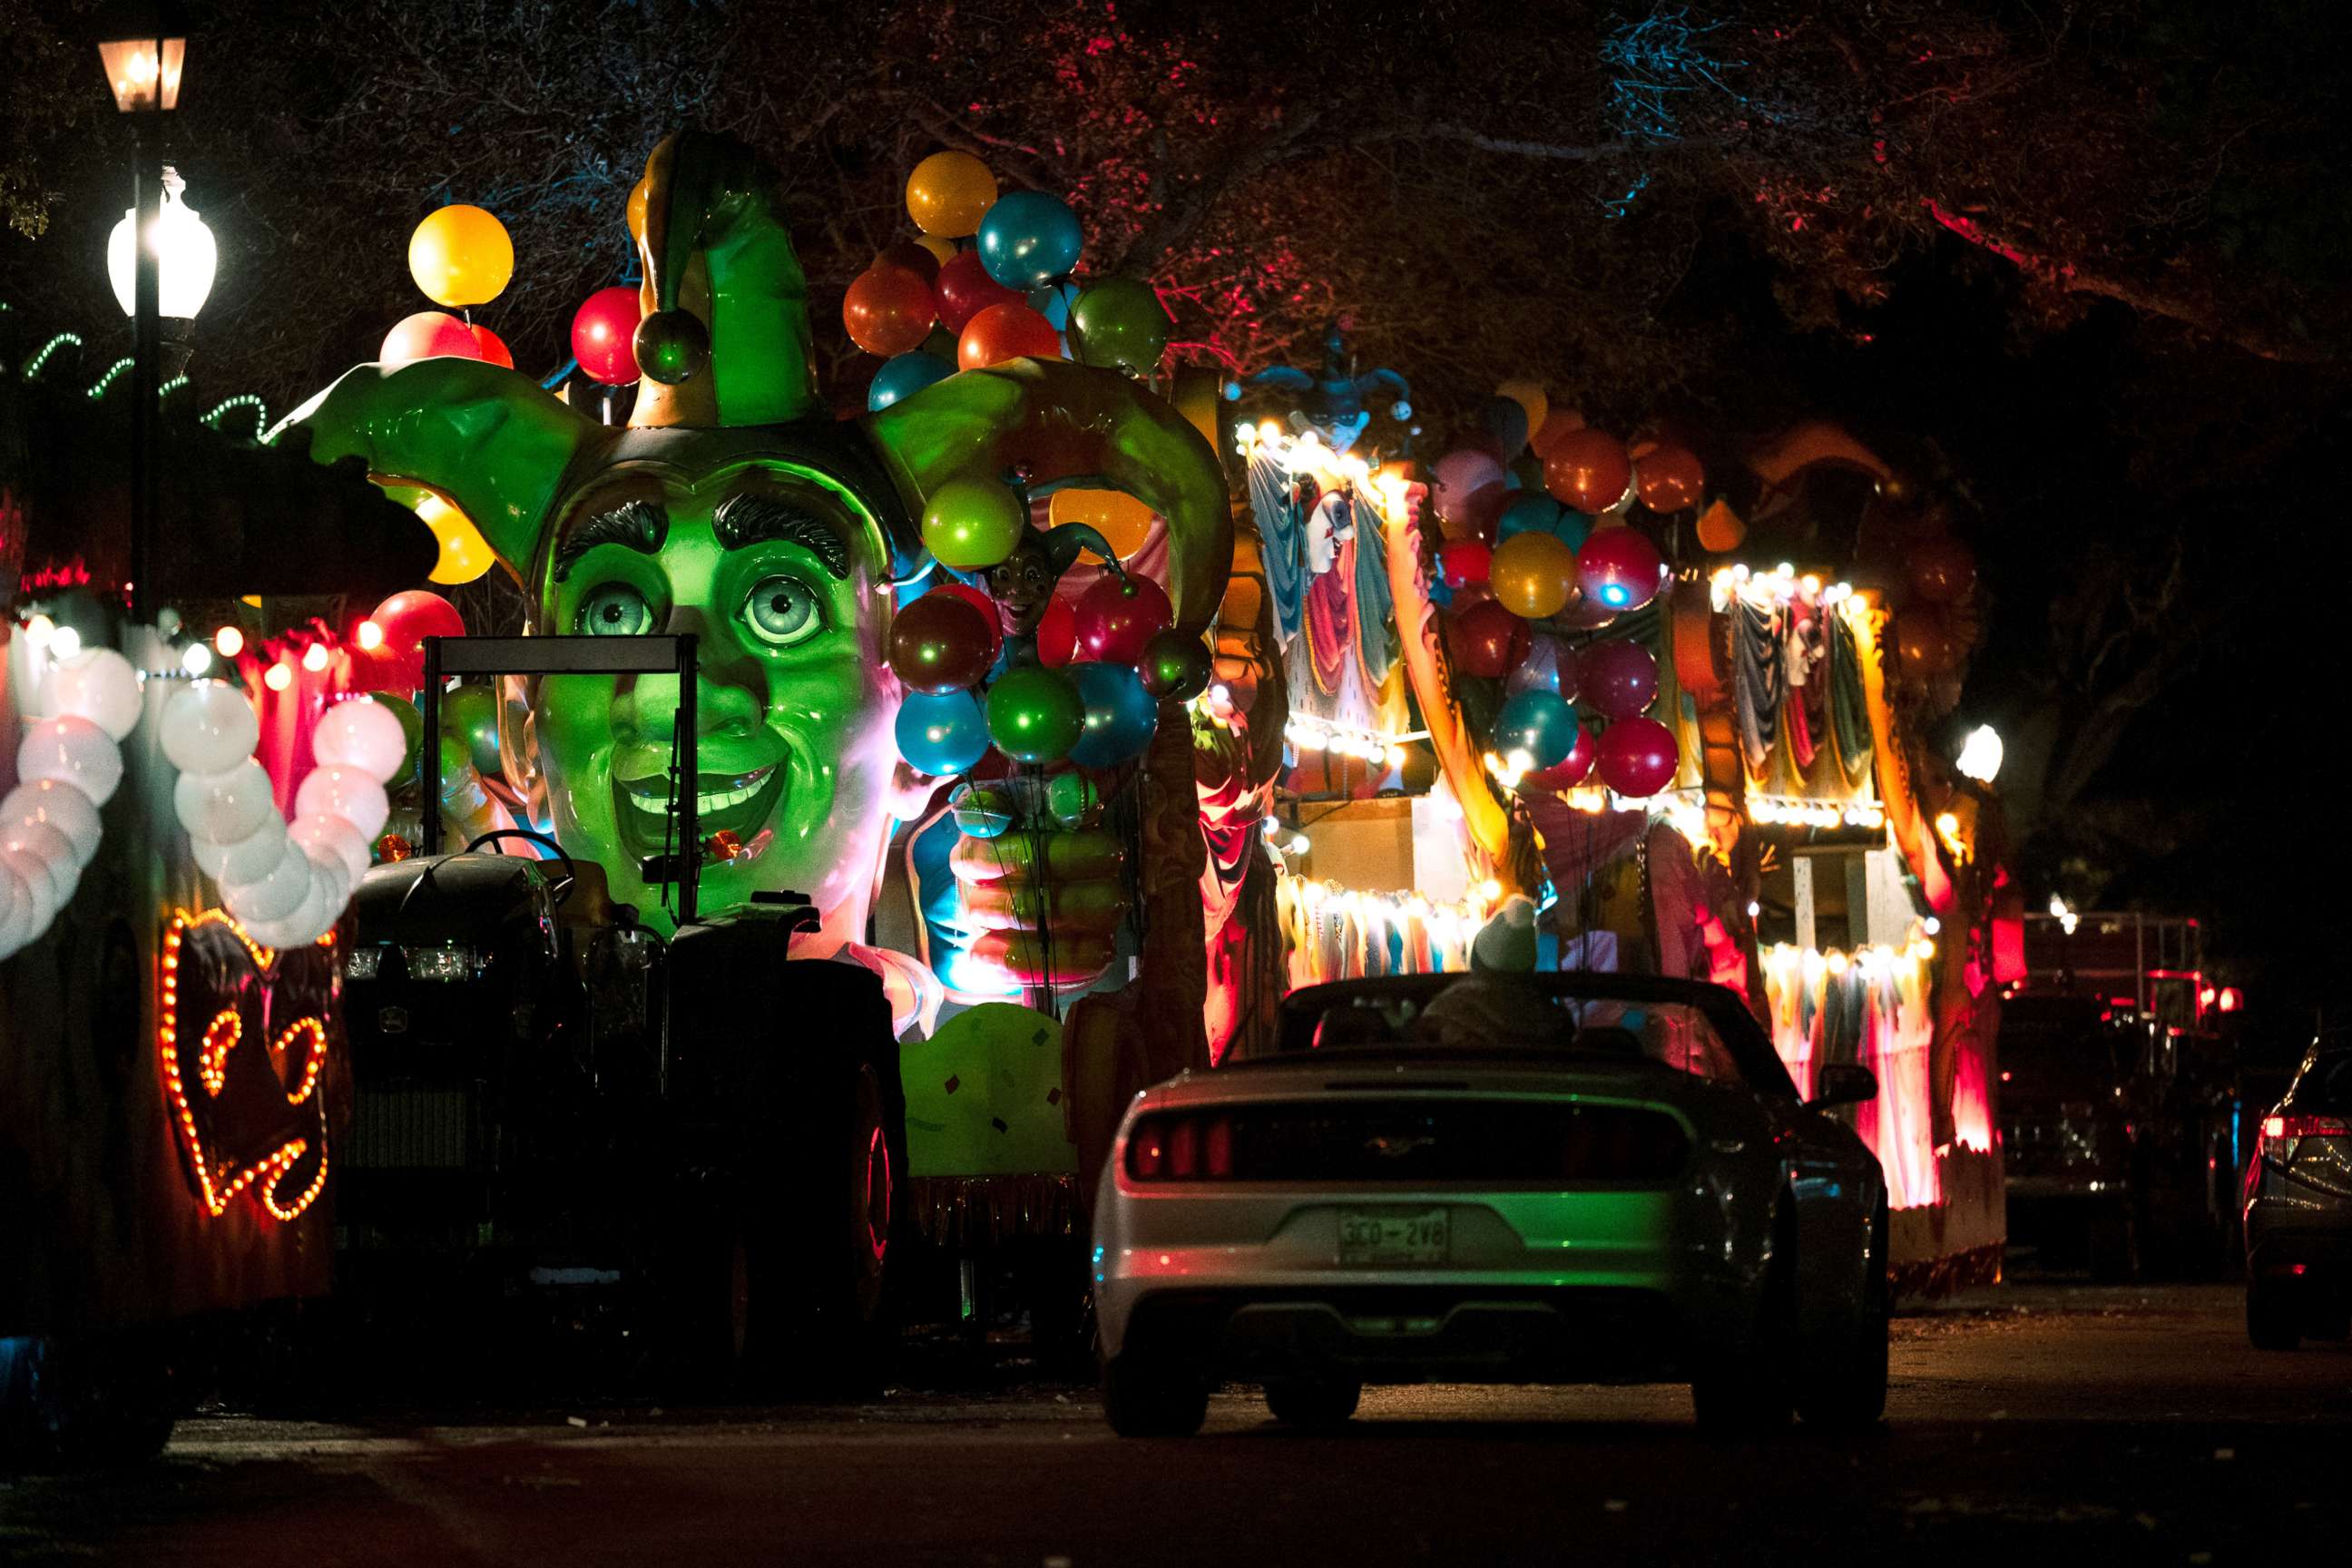 PHOTO: Vehicles line up to view Mardi Gras floats at the Float in the Oaks event in City Park, Feb. 14, 2021, in New Orleans, Louisiana.